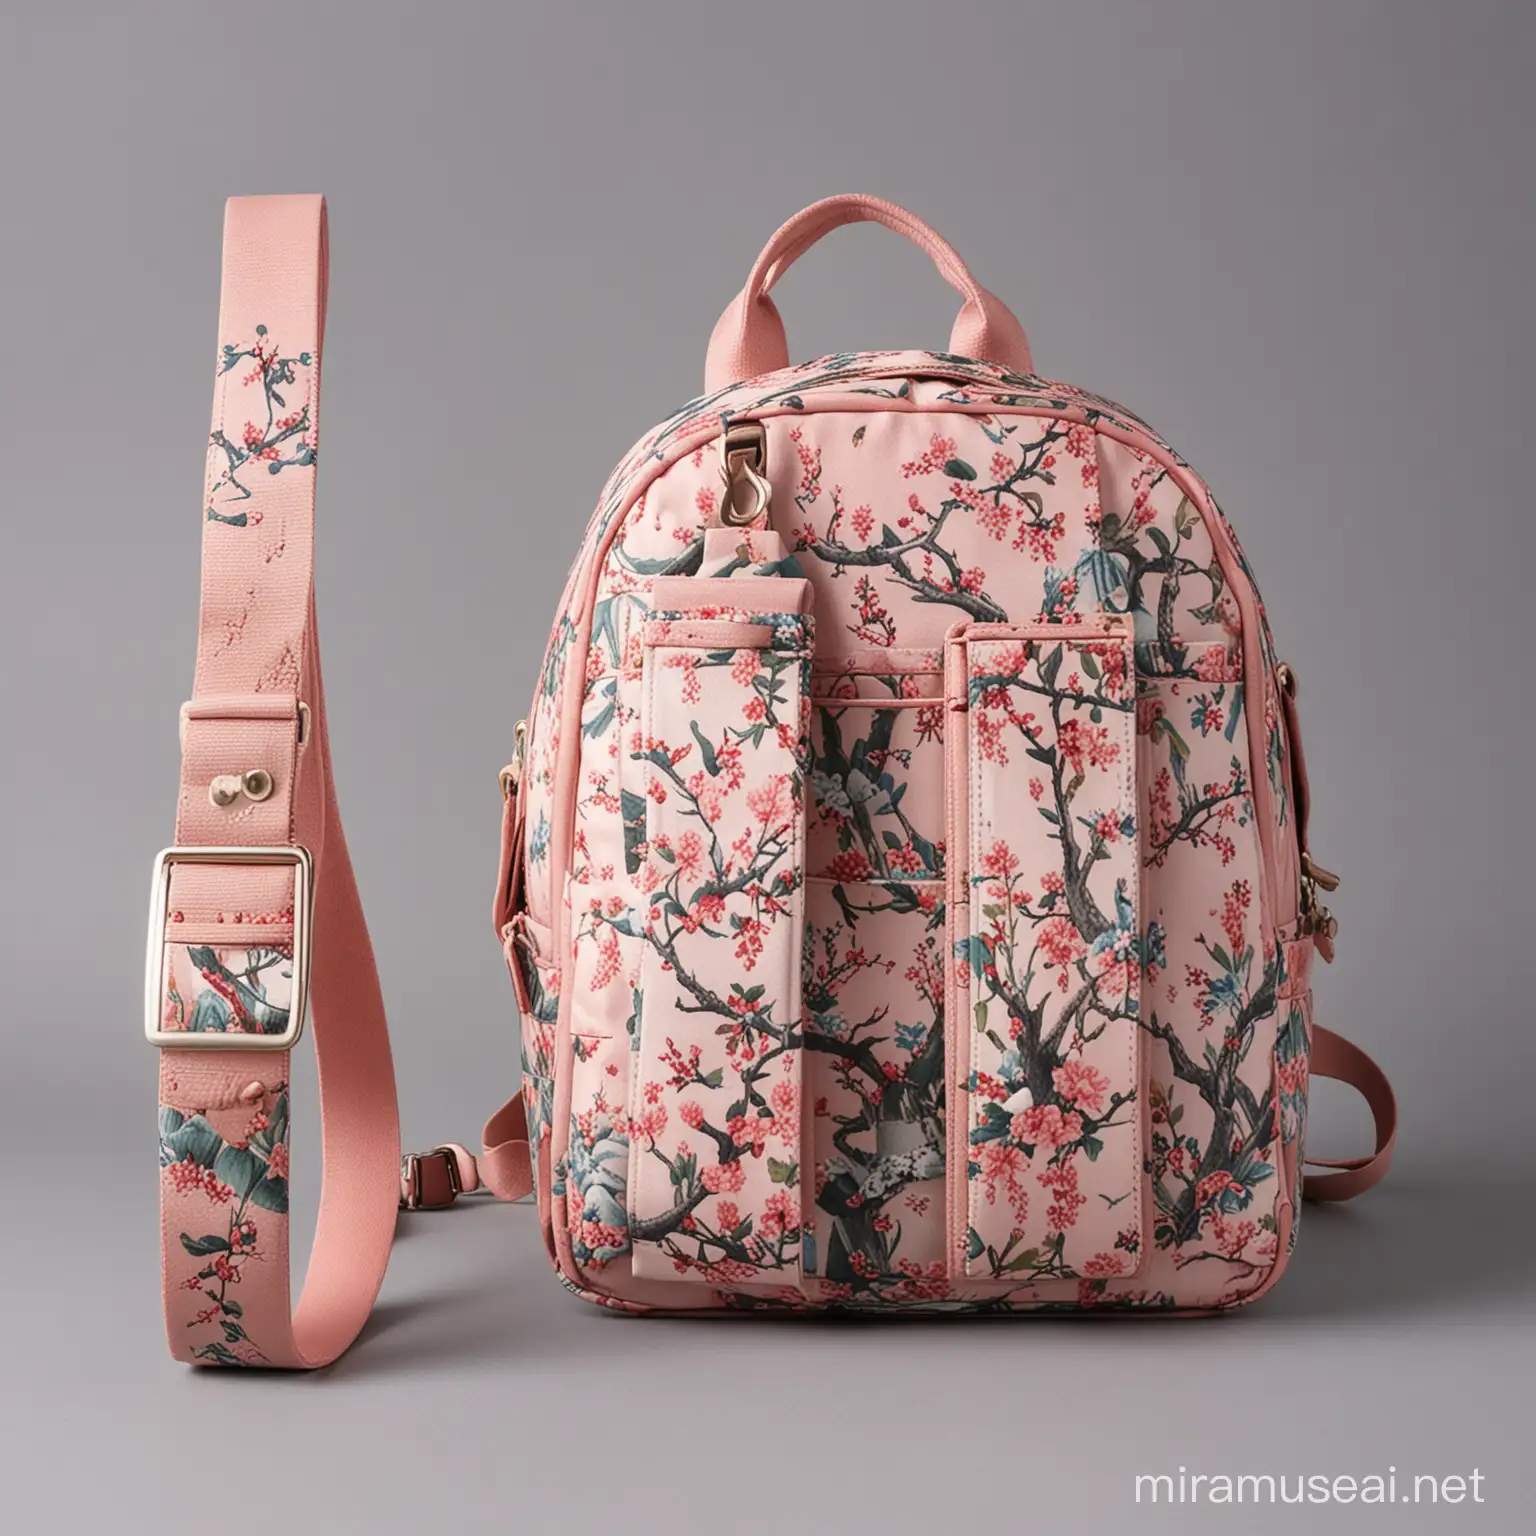 Peach Blossom and Willow Tree Patterned Travel Backpack with Waist Buckle